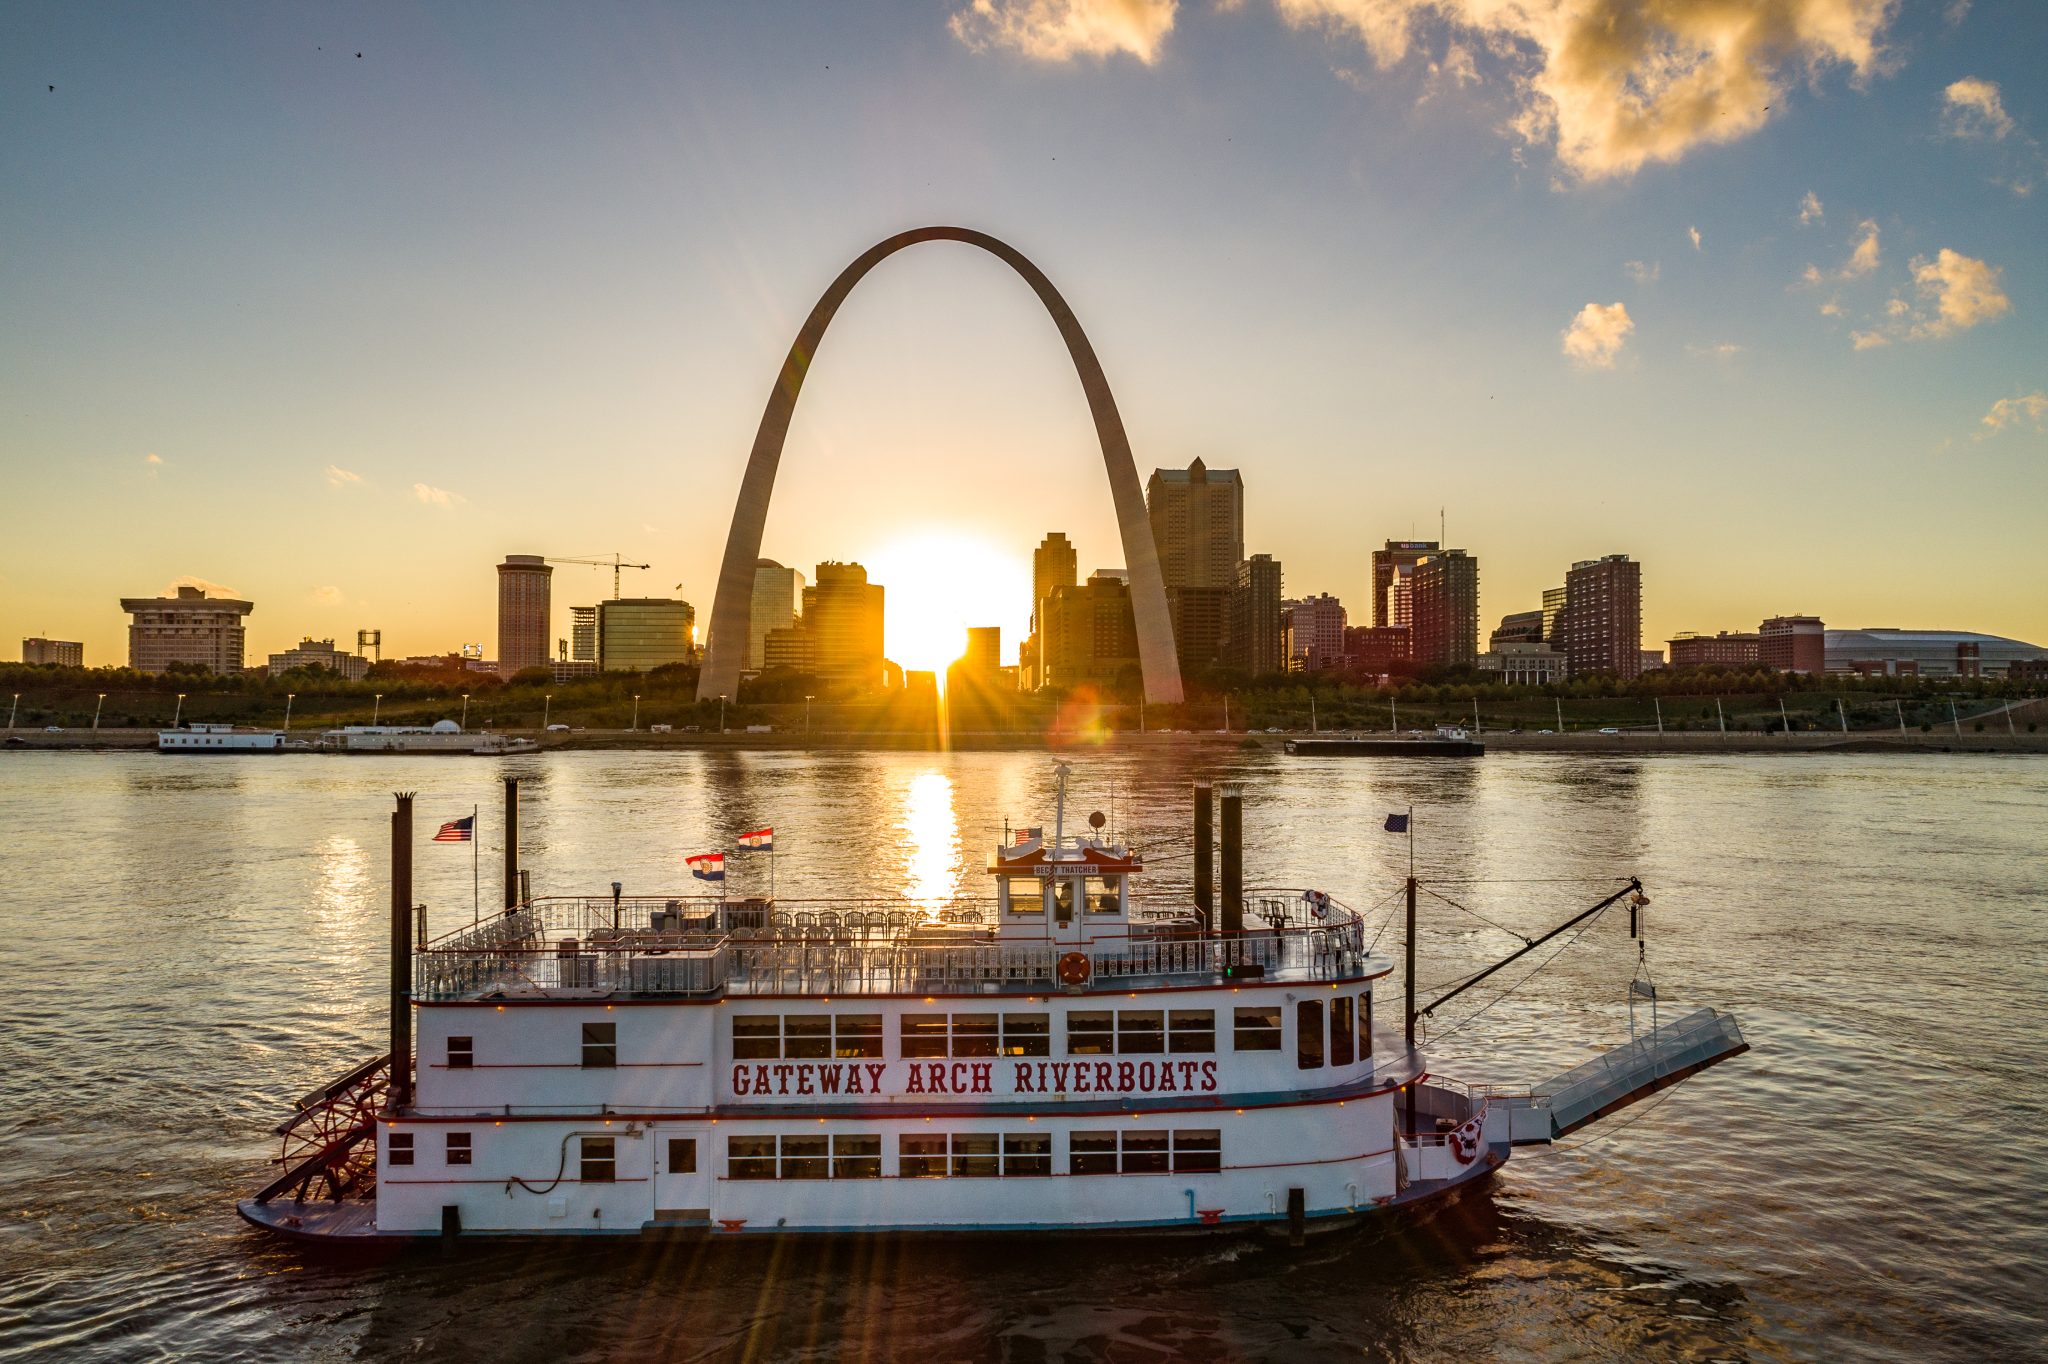 The Becky Thatcher riverboat floats past the Gateway Arch during sunset.